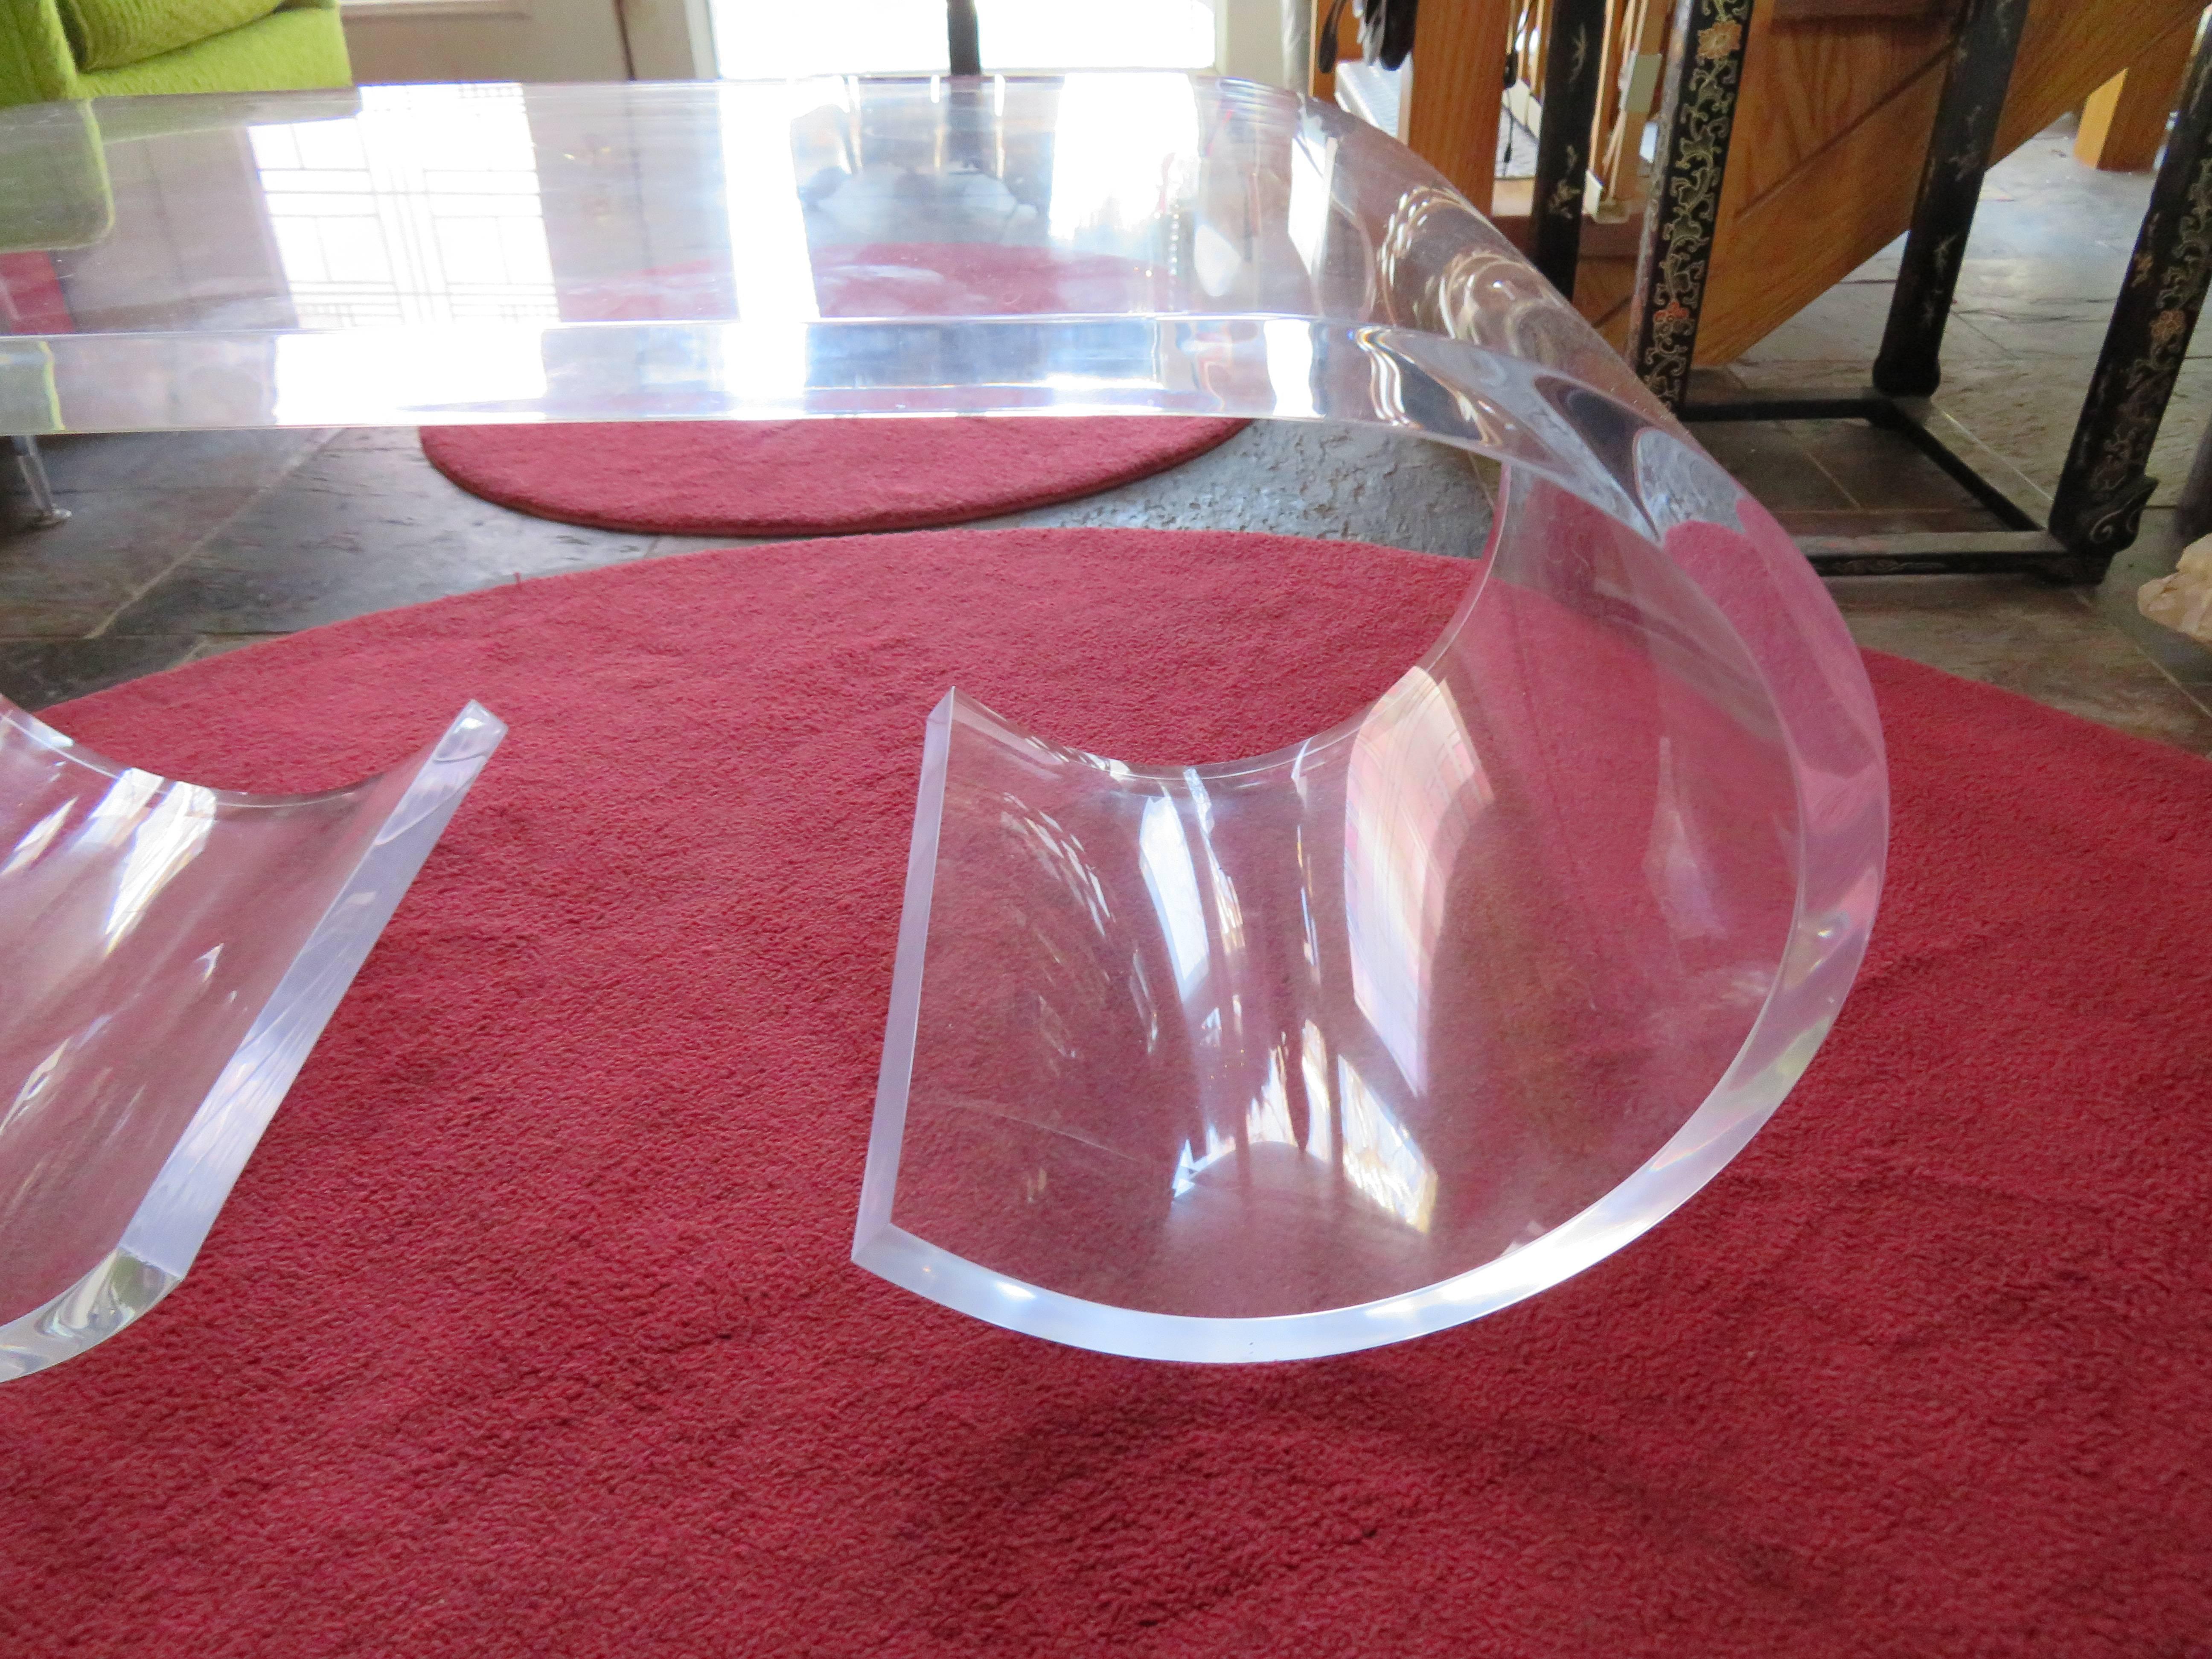 Pair Thick Lucite Scroll Cocktail Coffee Tables, style of Karl Springer, 1970s In Excellent Condition For Sale In Pemberton, NJ